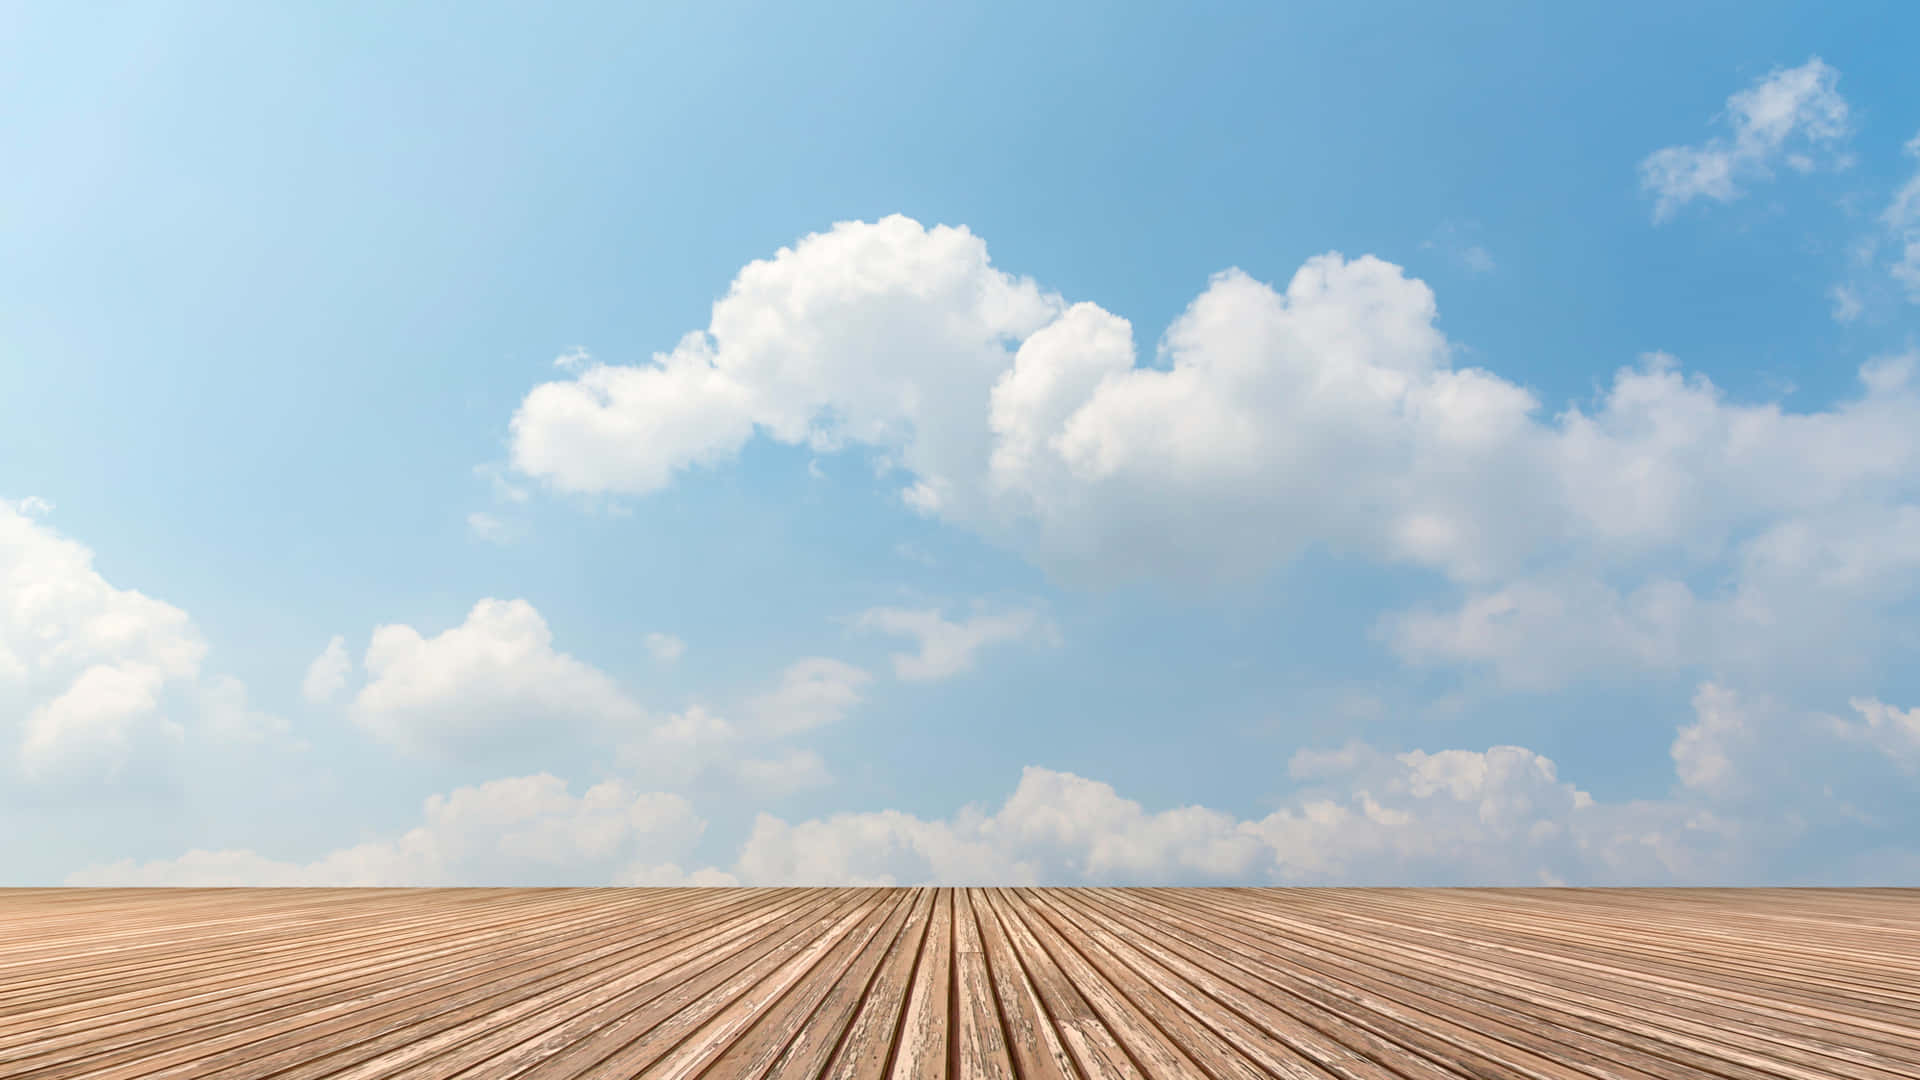 Sky Background Wooden Surface